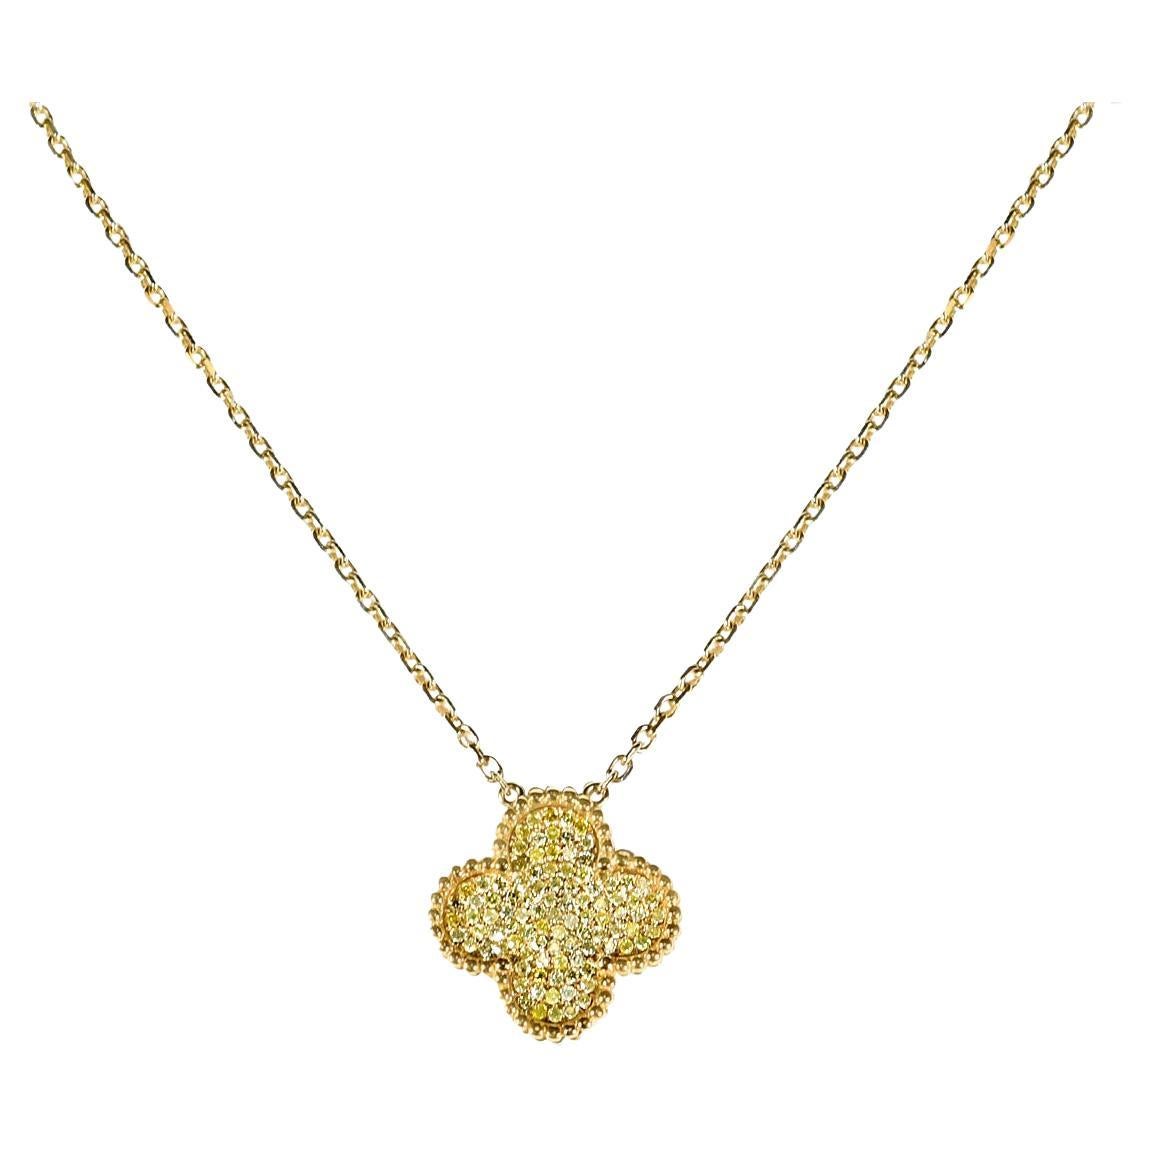 NWT $6, 042 Important 18KT Gold Fancy Yellow Diamond Clover Pendant Necklace For Sale